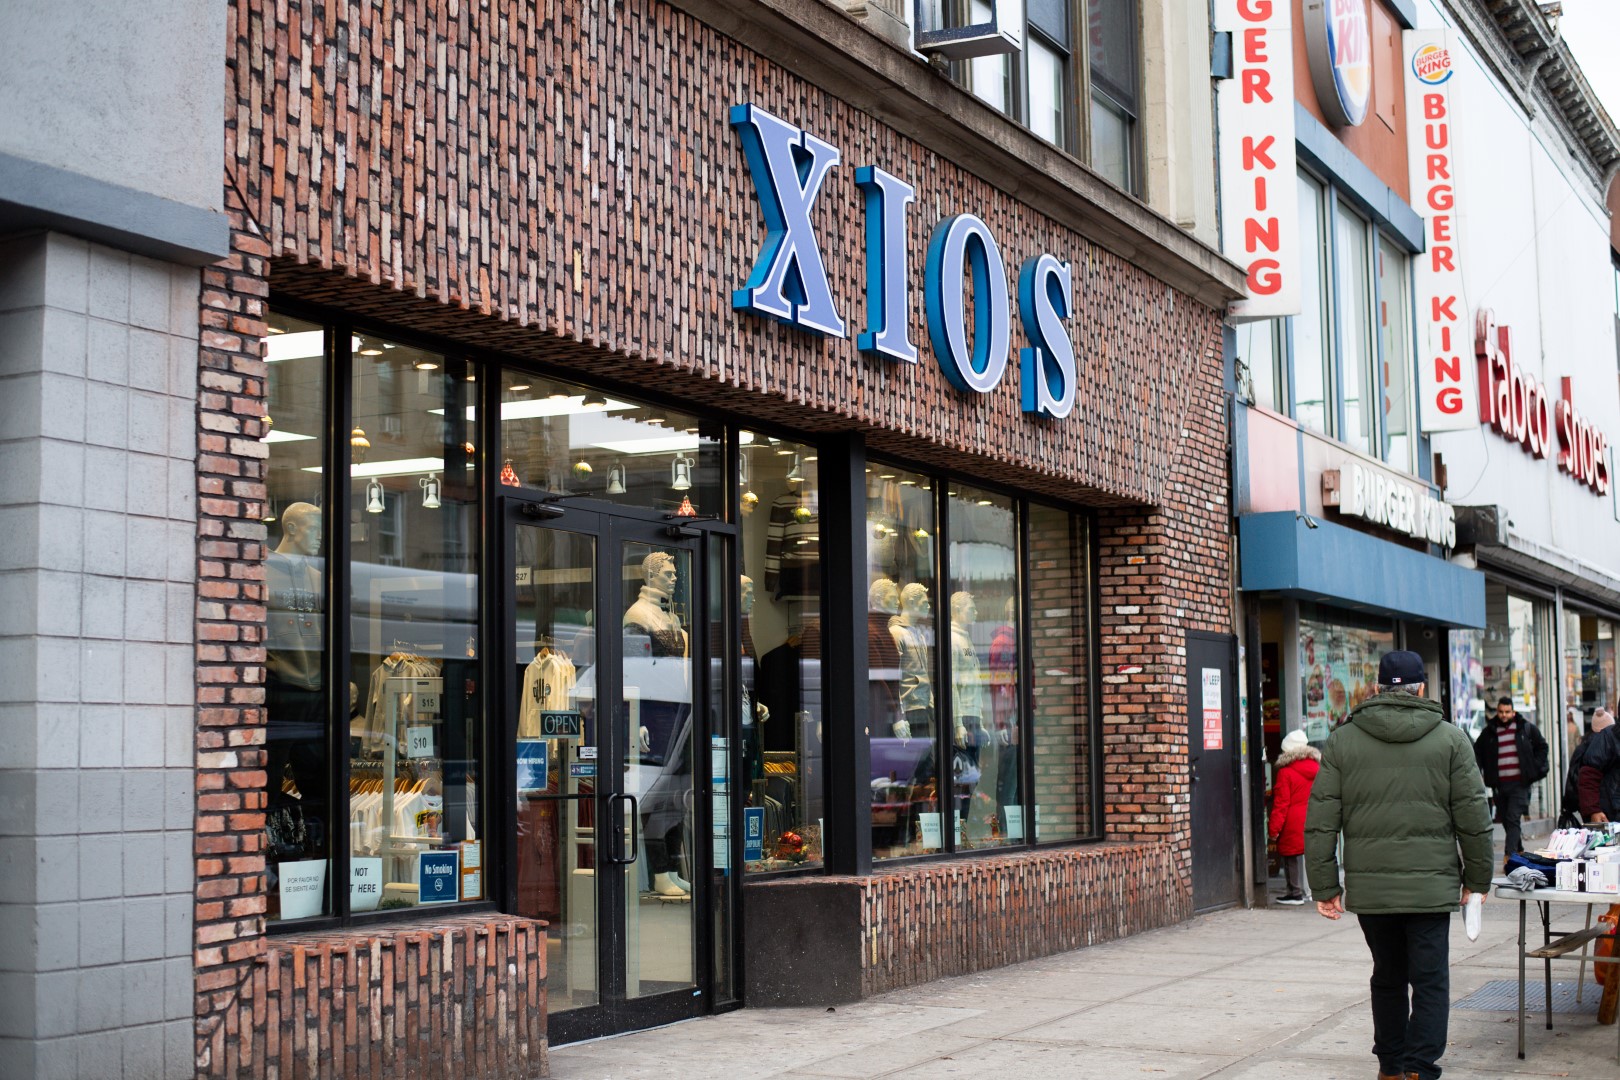 Exterior view of a brick building with a blue sign reading "xios" next to a burger king, featuring large glass windows displaying clothing and a pedestrian walking by.